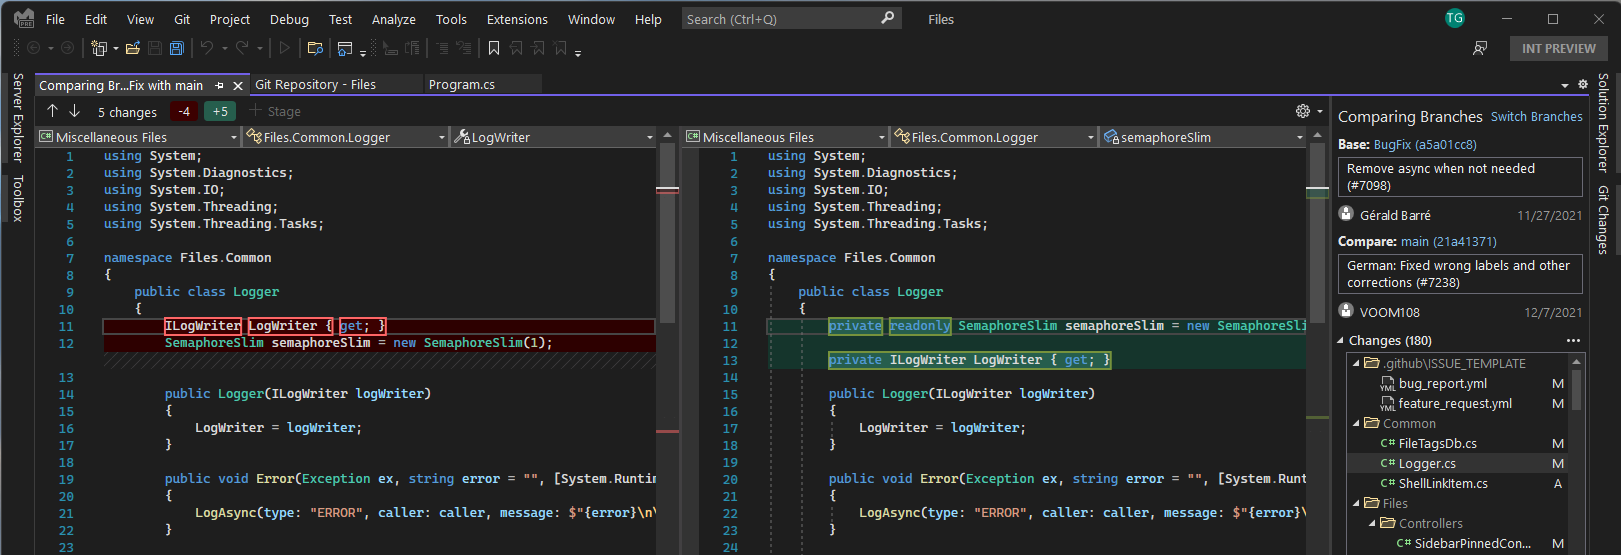 A screenshot of Visual Studio 2012 with the preparation.exe process running in the background.